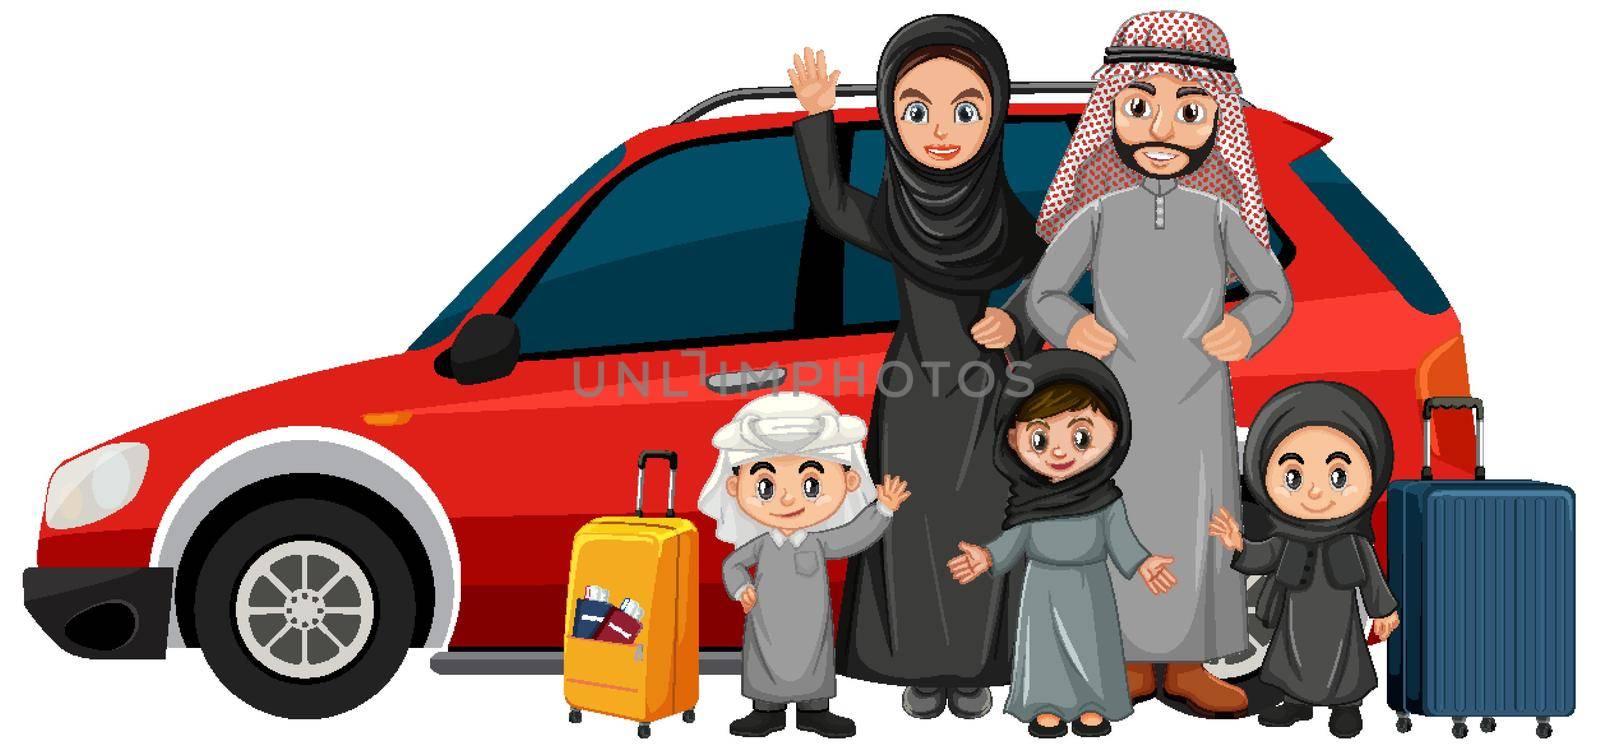 Arabian family on holiday by iimages